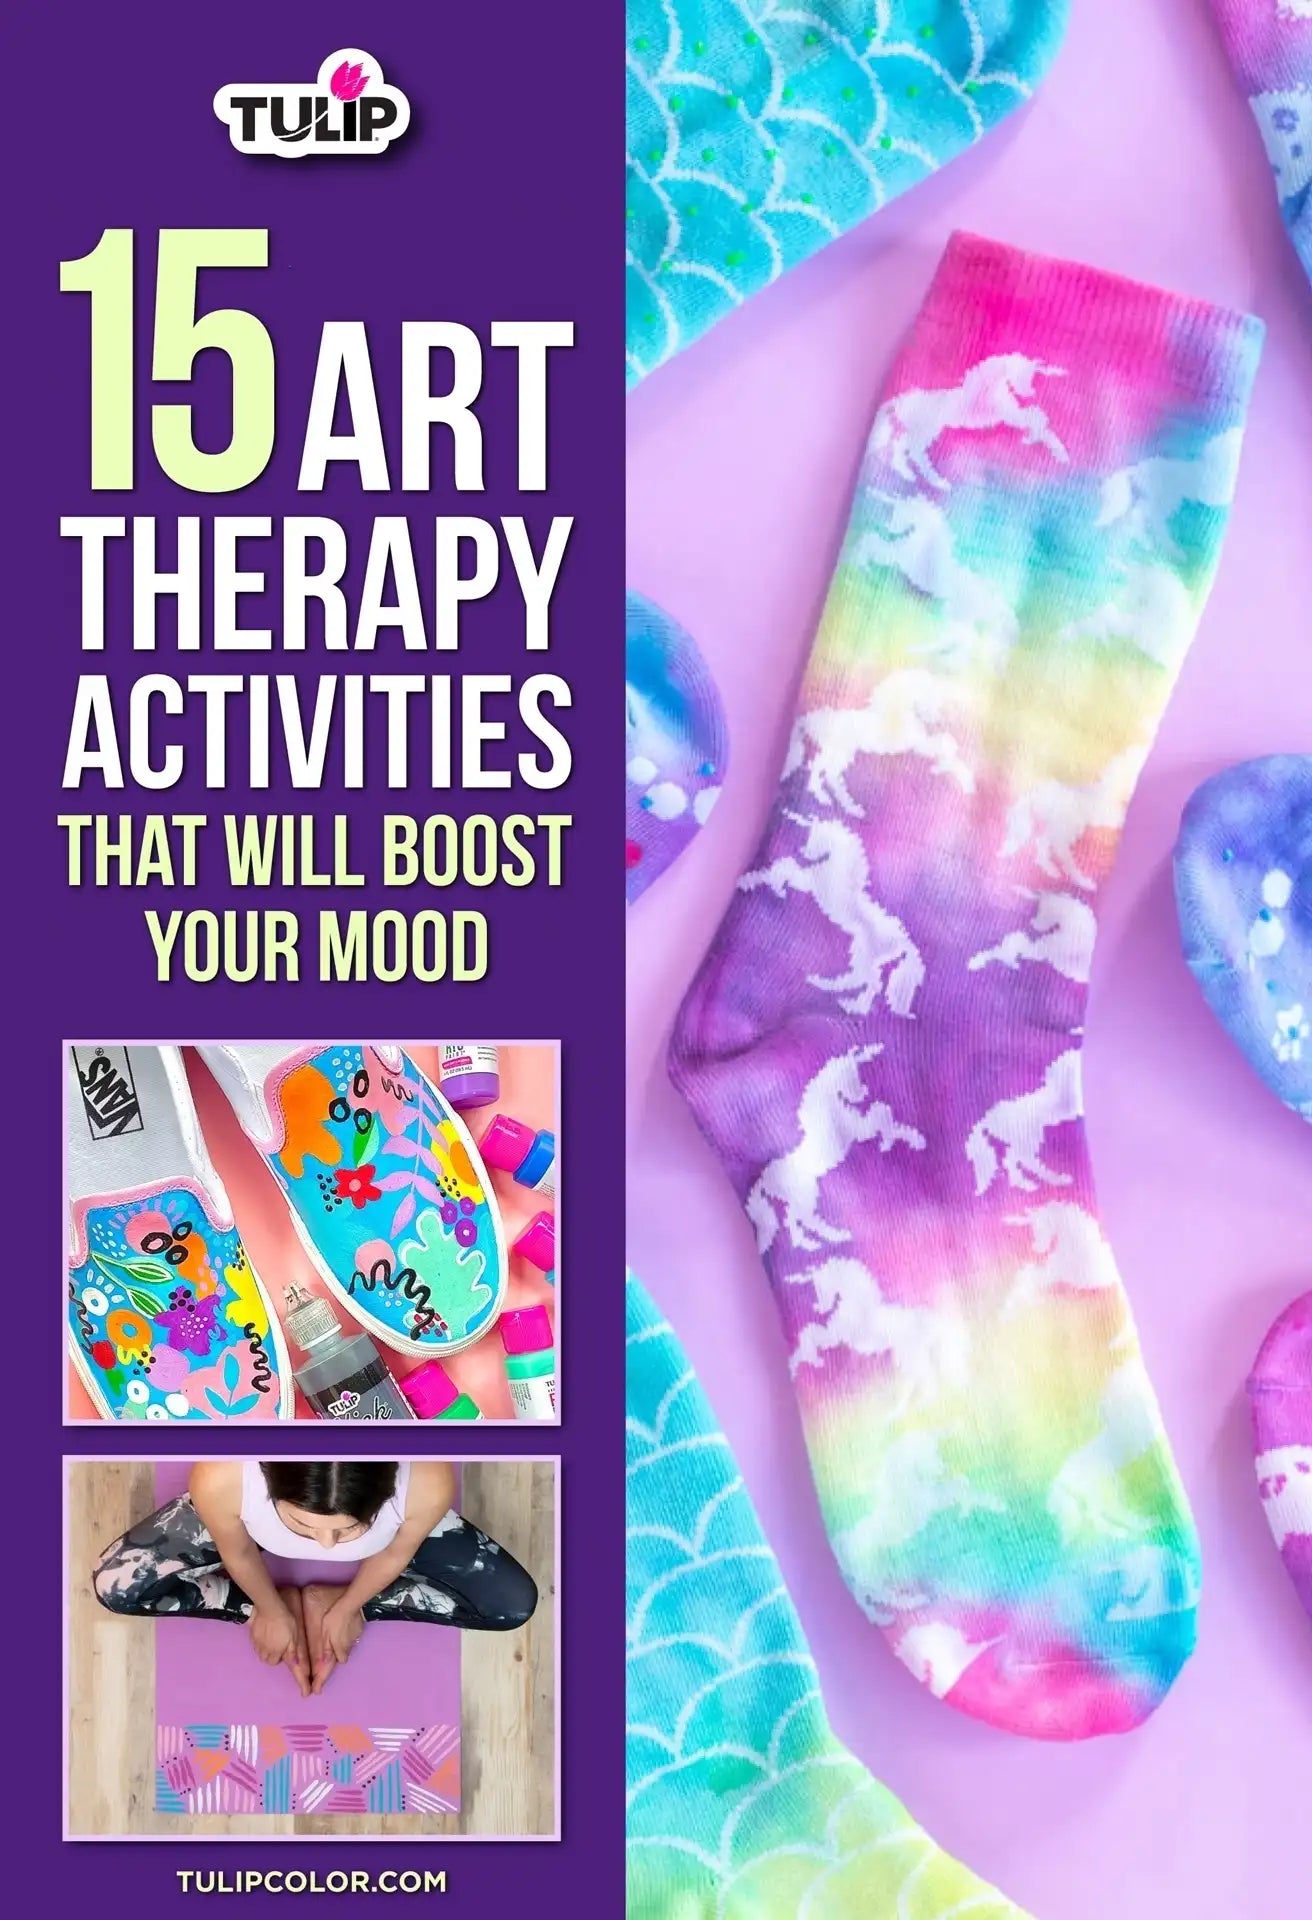 15 Art Therapy Activities That Will Boost Your Mood